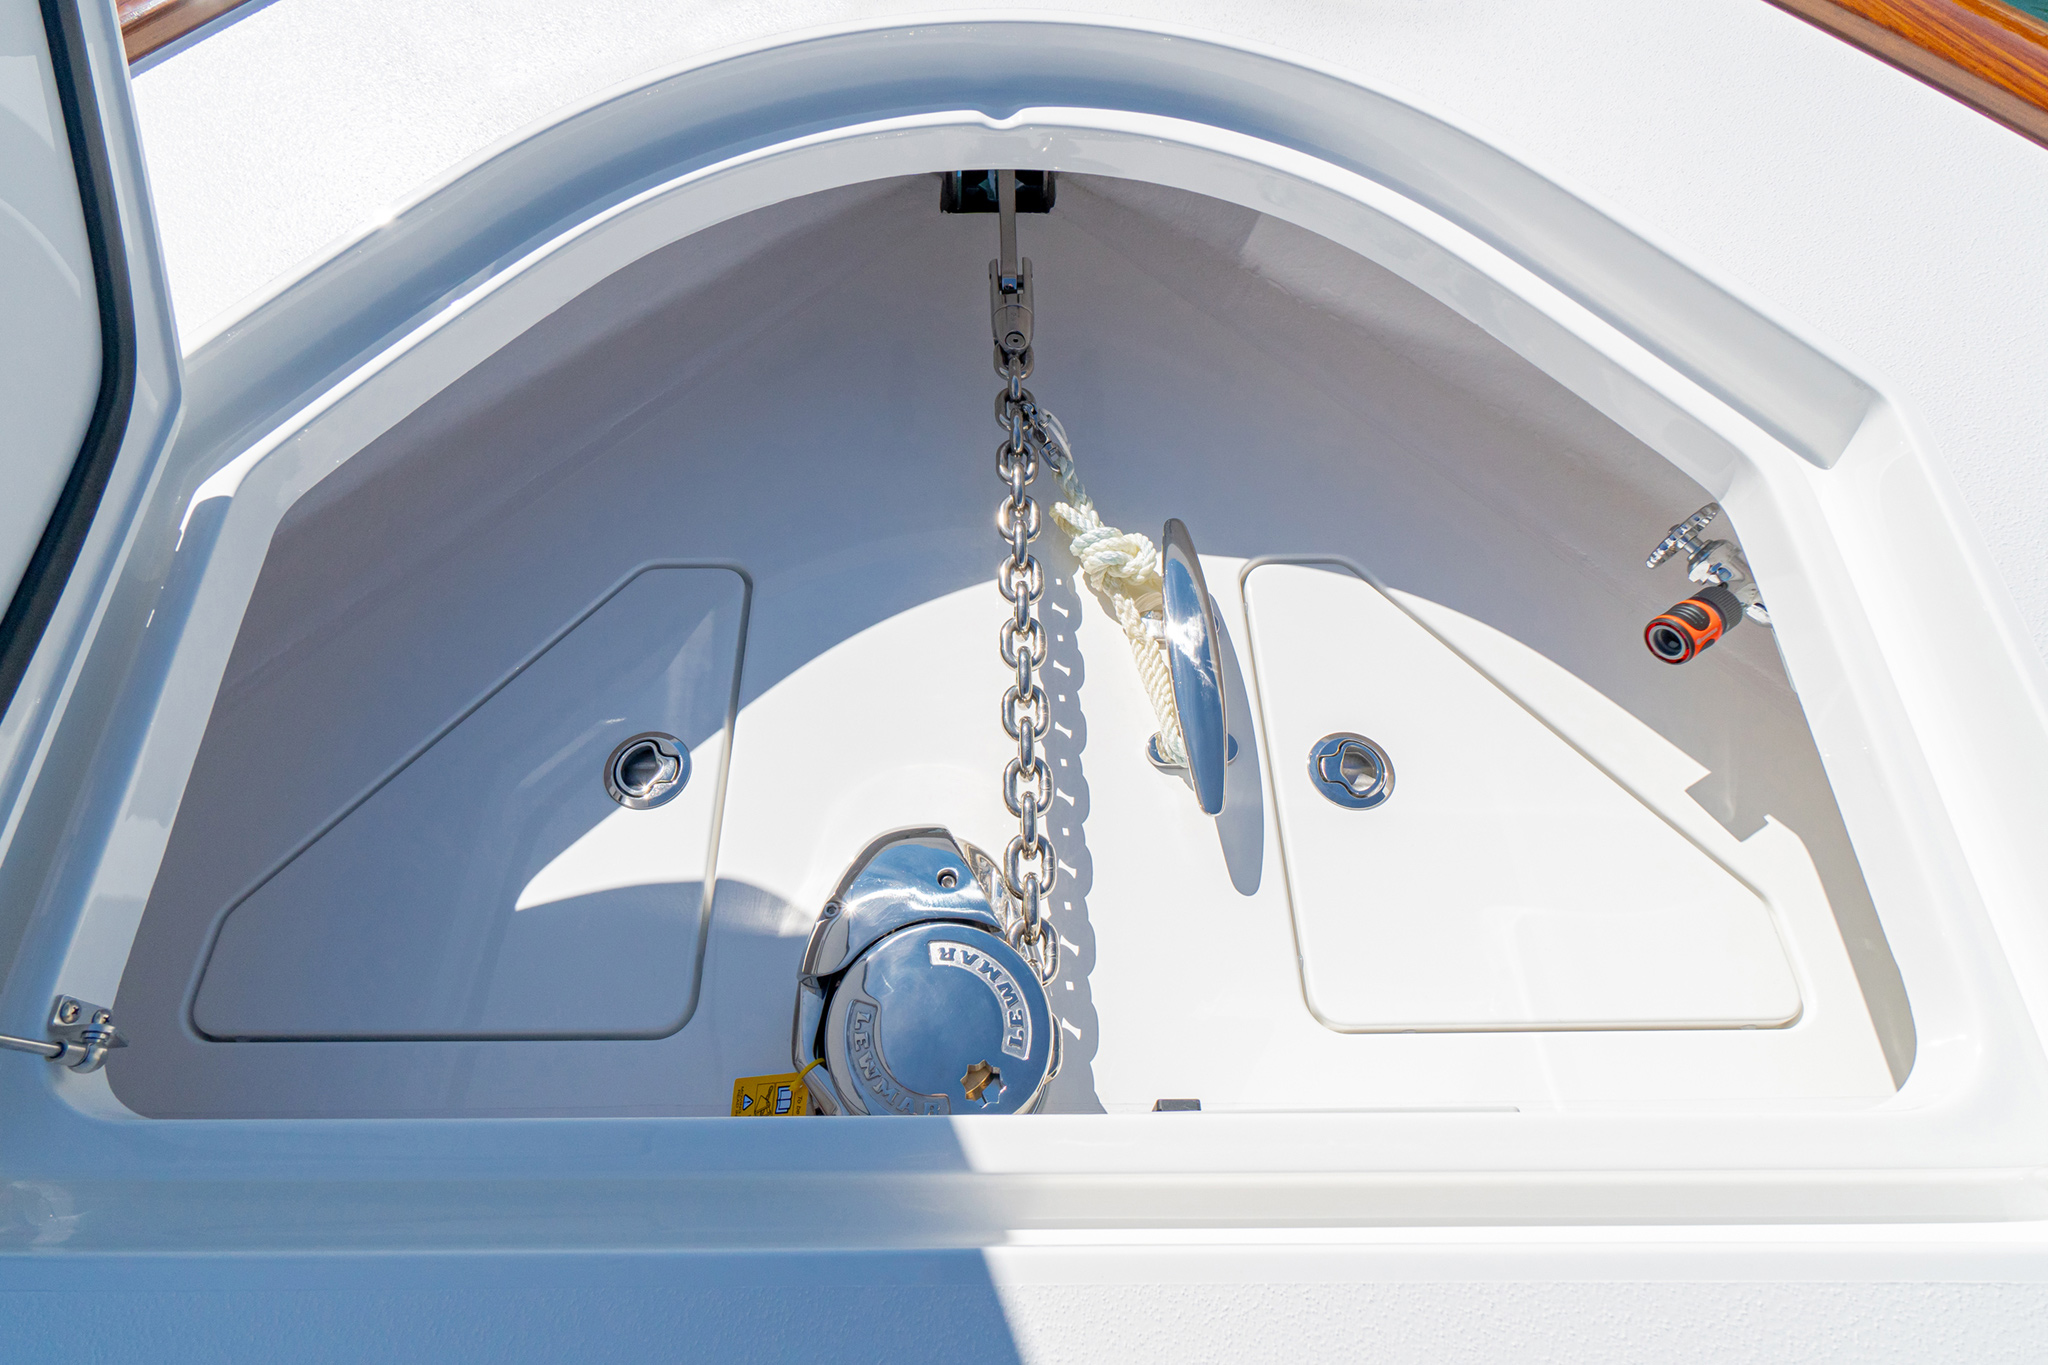 Large anchor locker with electric windlass, anchor chute, access panels and freshwater wash down.